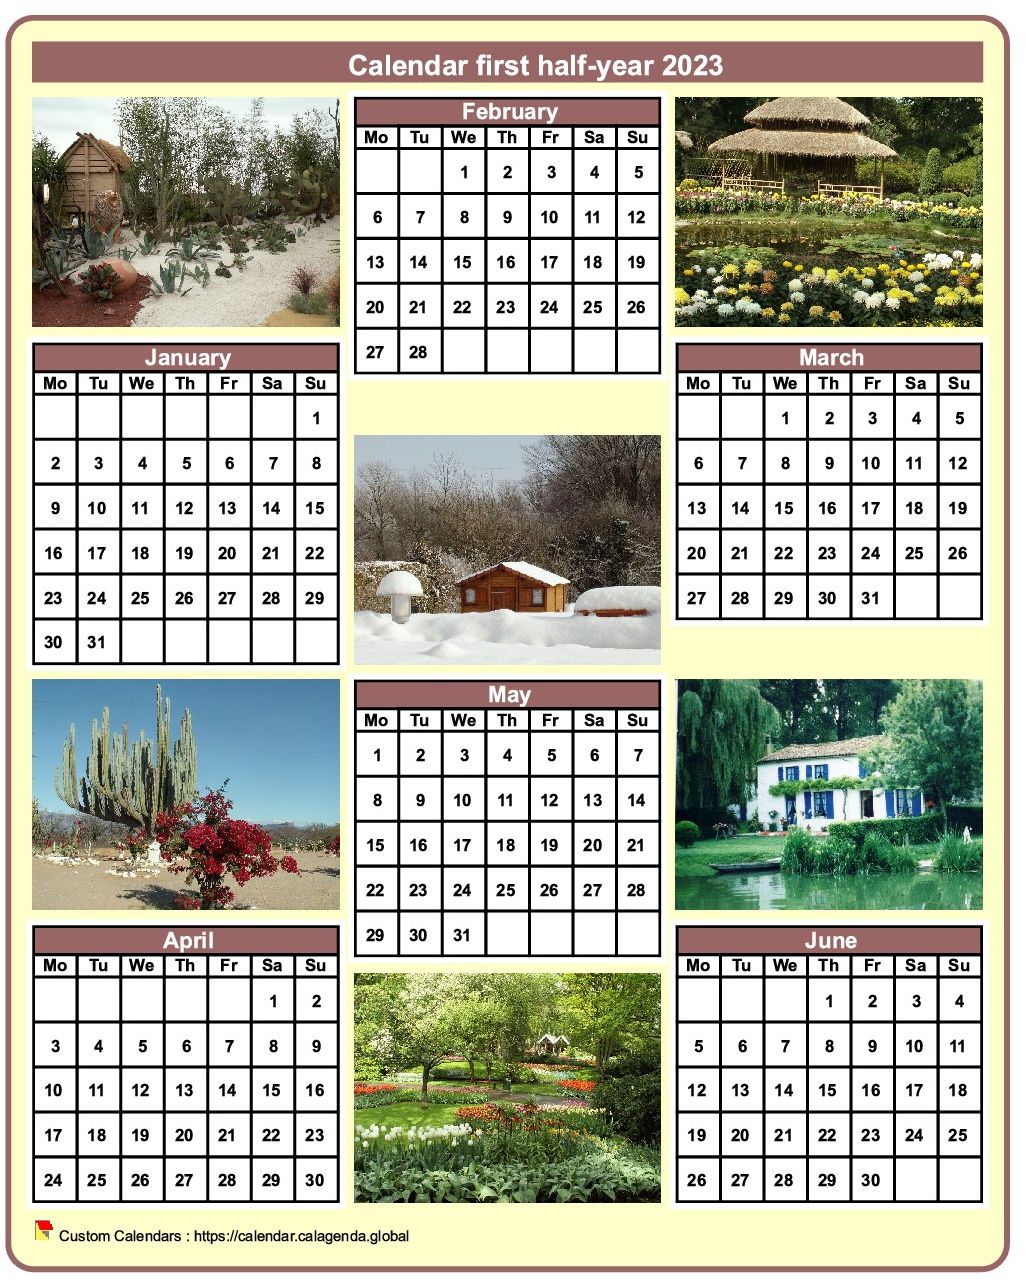 Calendar 2023 half-year with a different photo every month